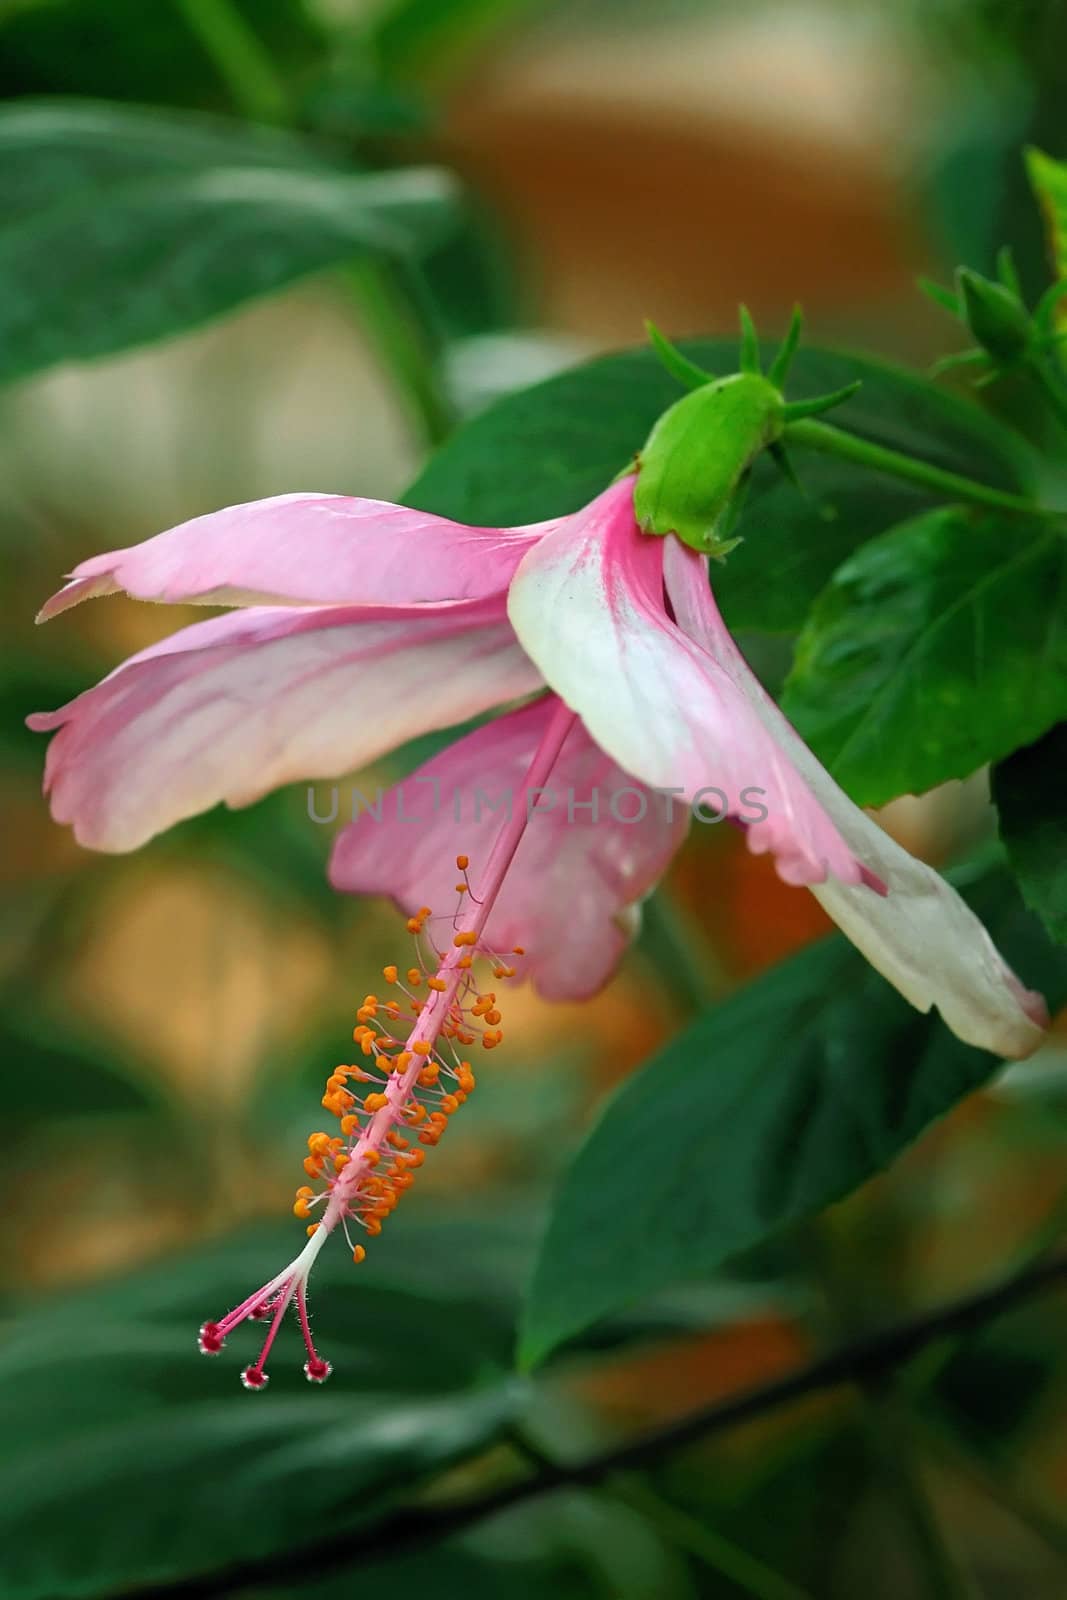 A beautiful and fully bloomed pink hibiscus flower